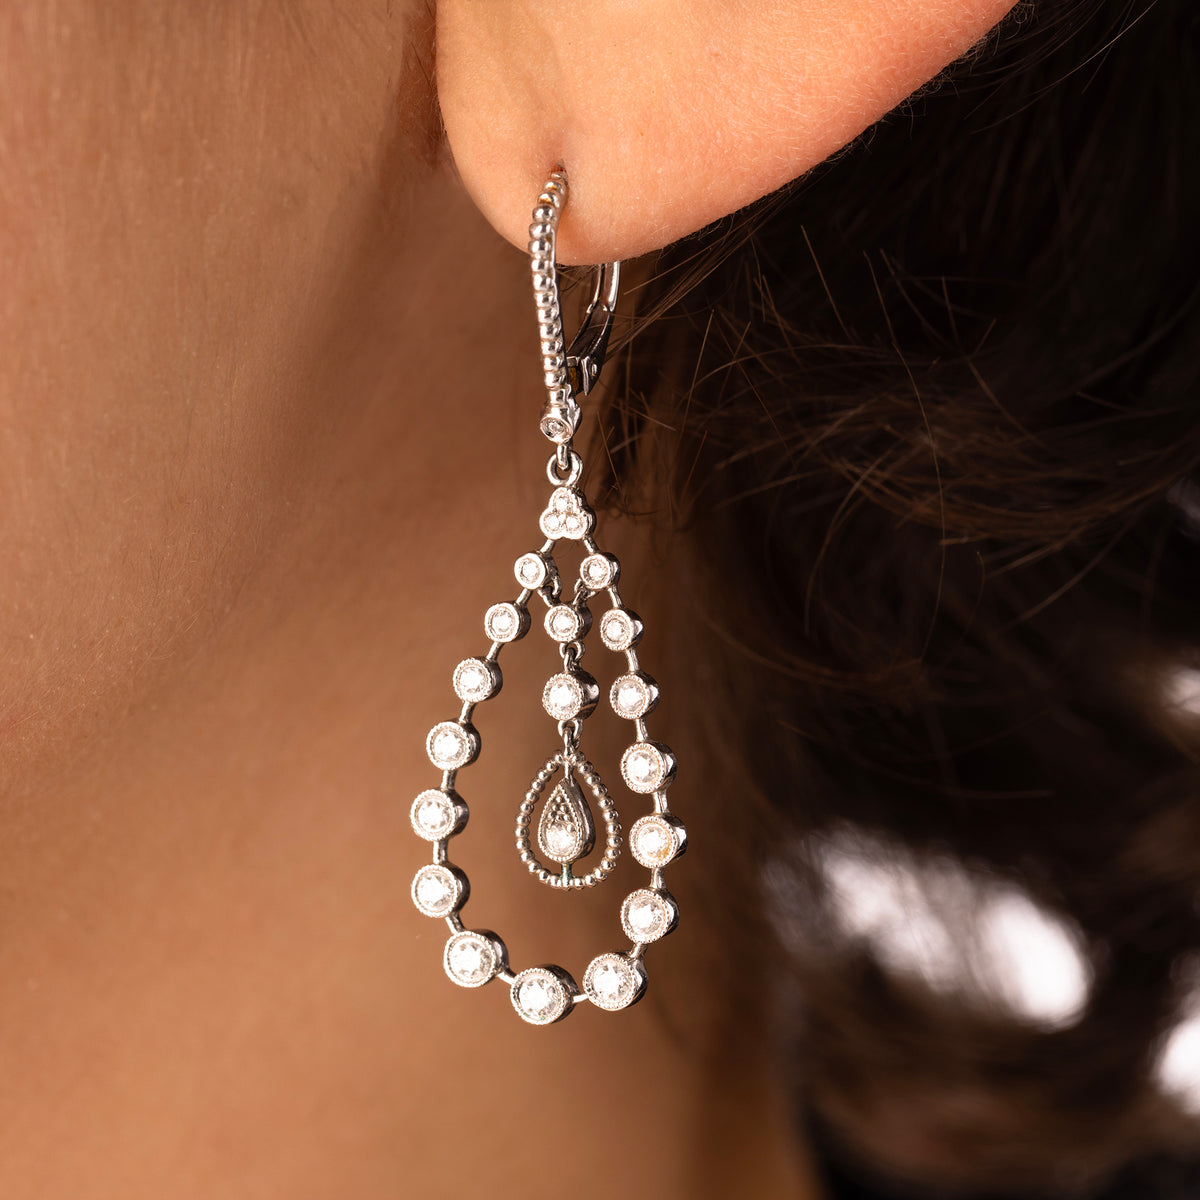 White Gold and Diamond Drop Earrings